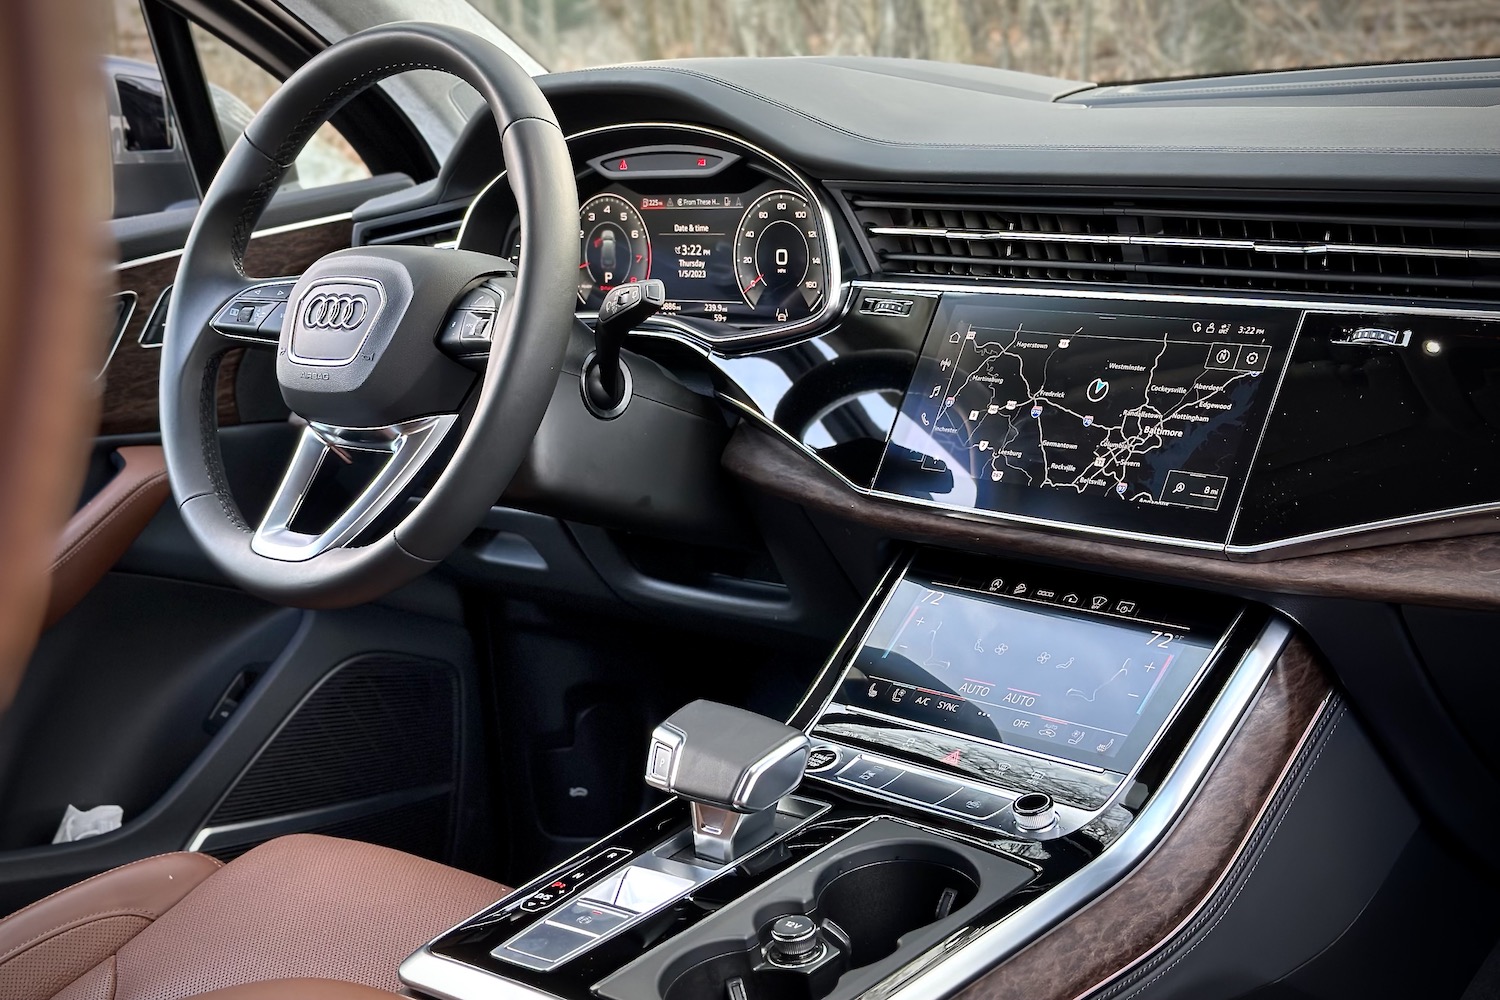 Dashboard, infotainment system, and steering wheel in the 2022 Audi Q7 Prestige from the rear seats.